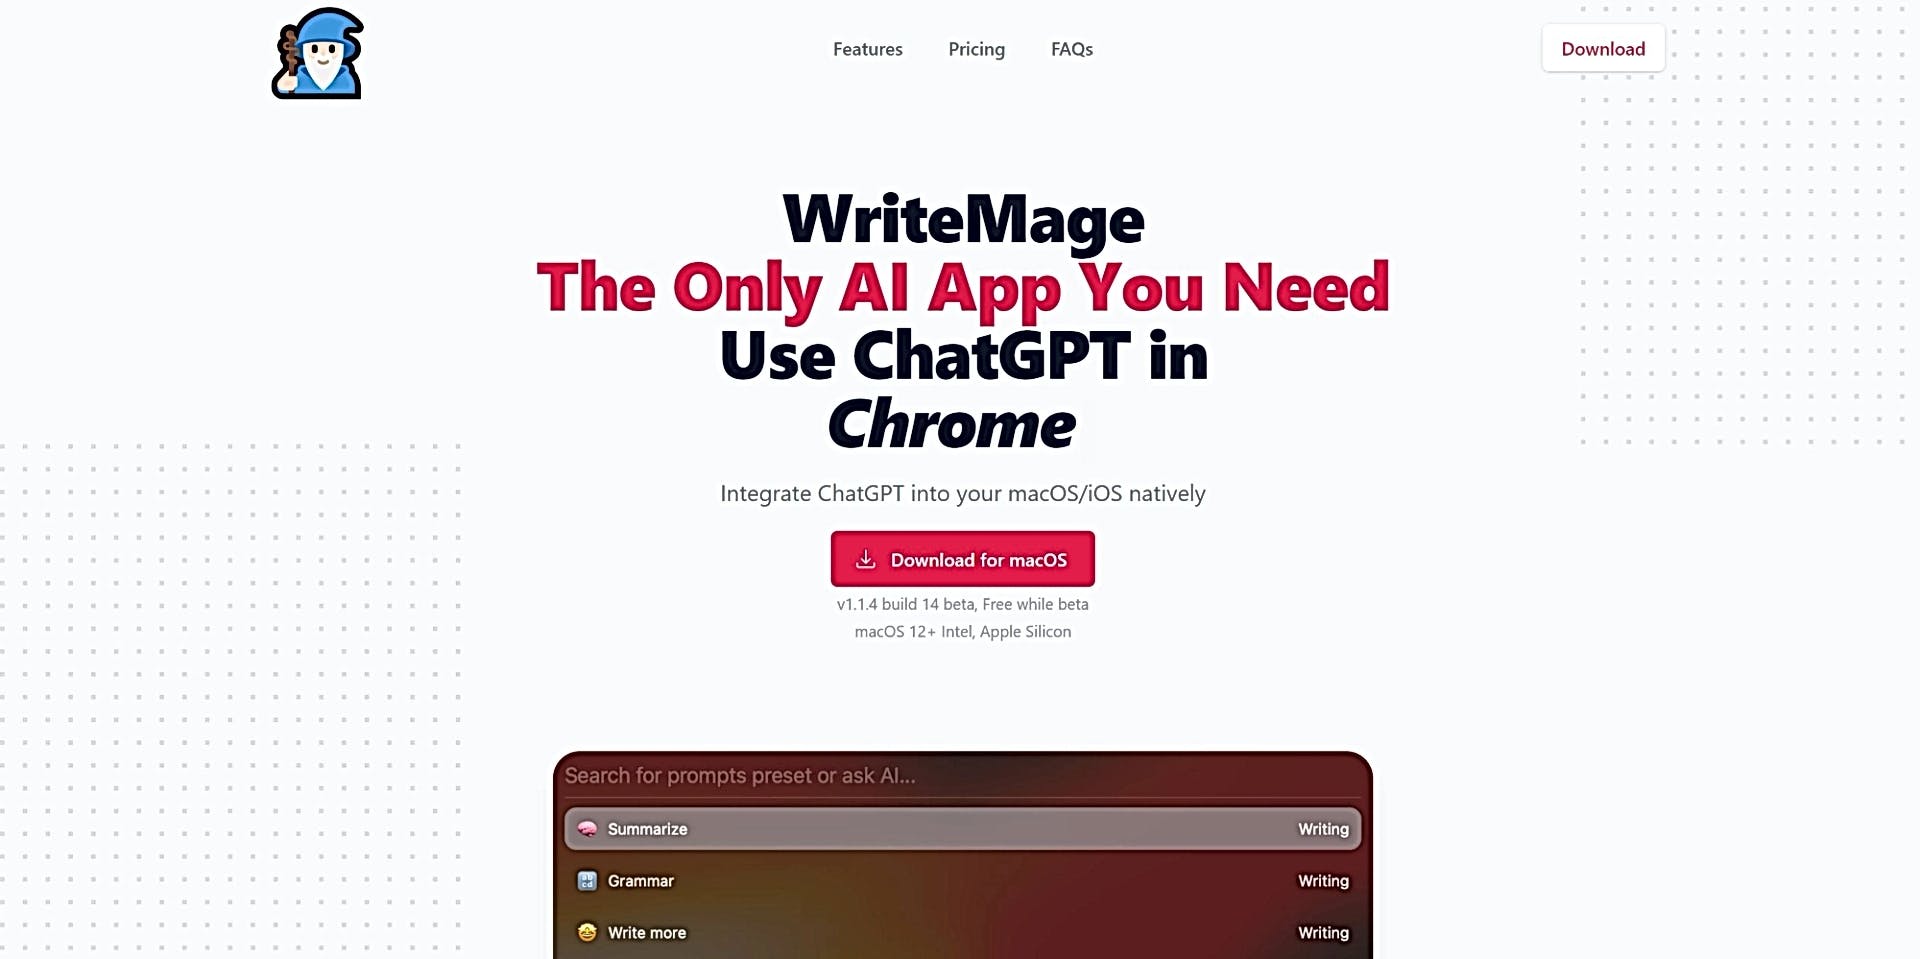 WriteMage featured